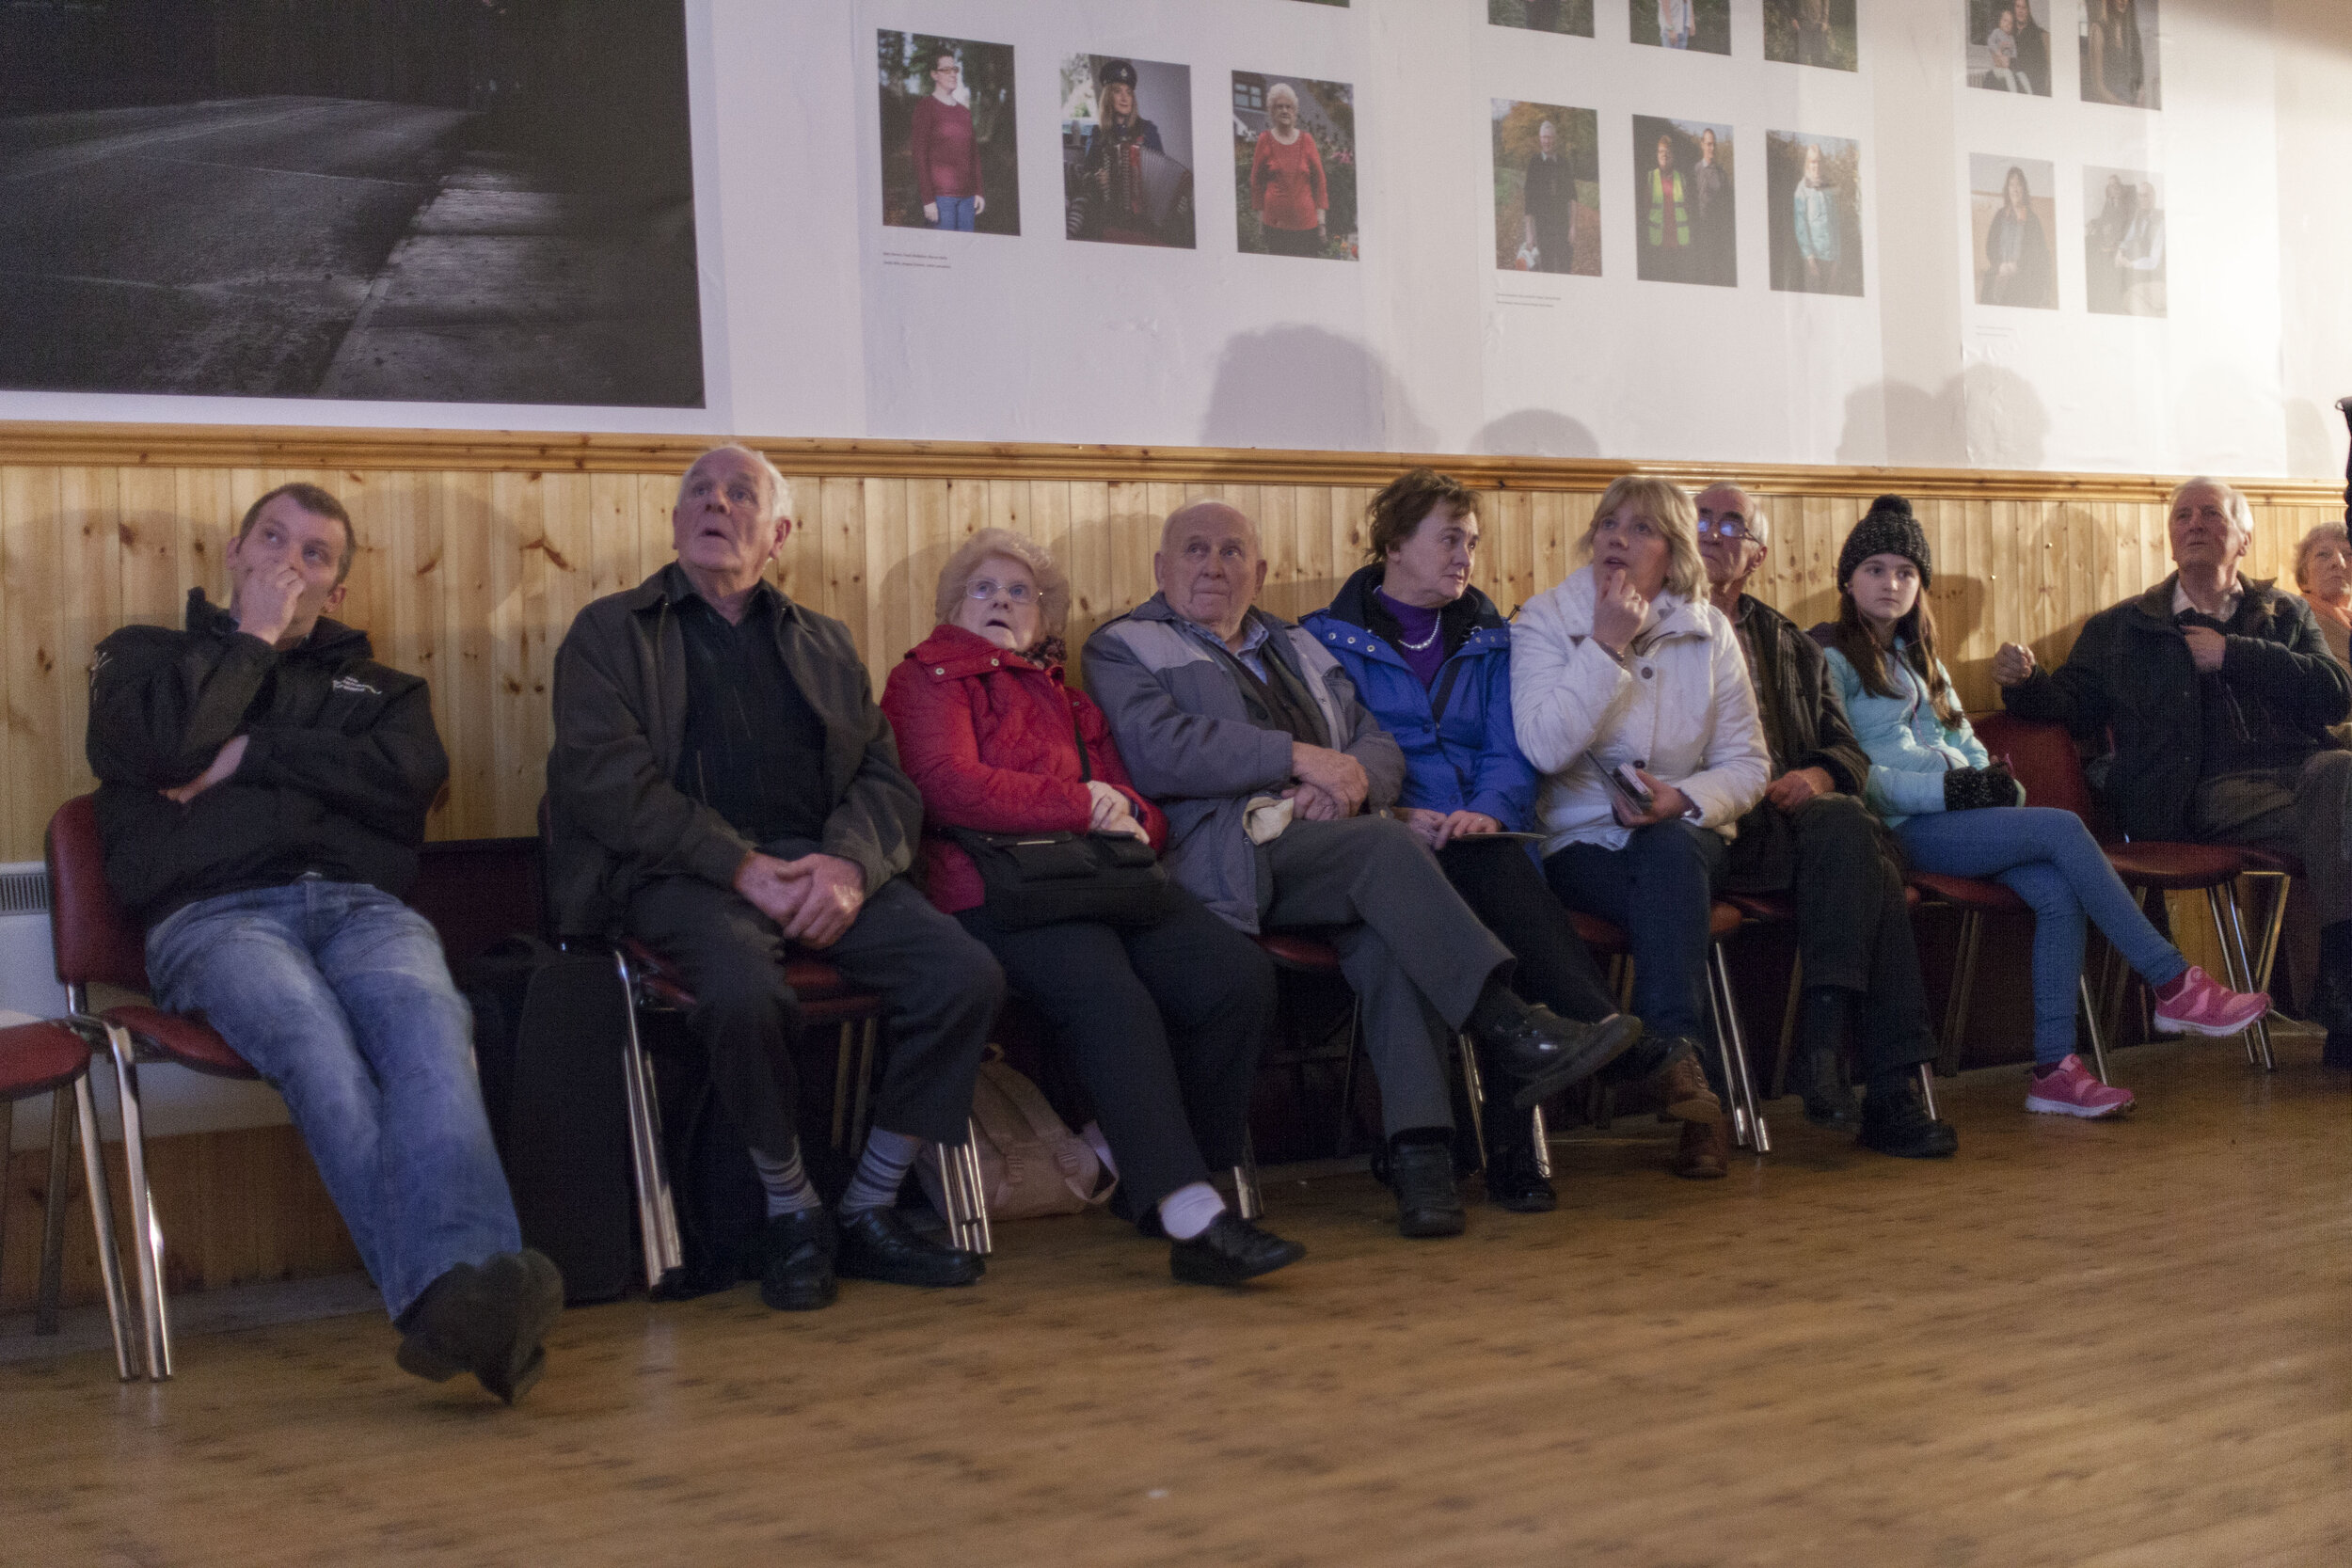  Members of the community of Drum watching a presentation on ‘Drum: Portrait of a Village’ 